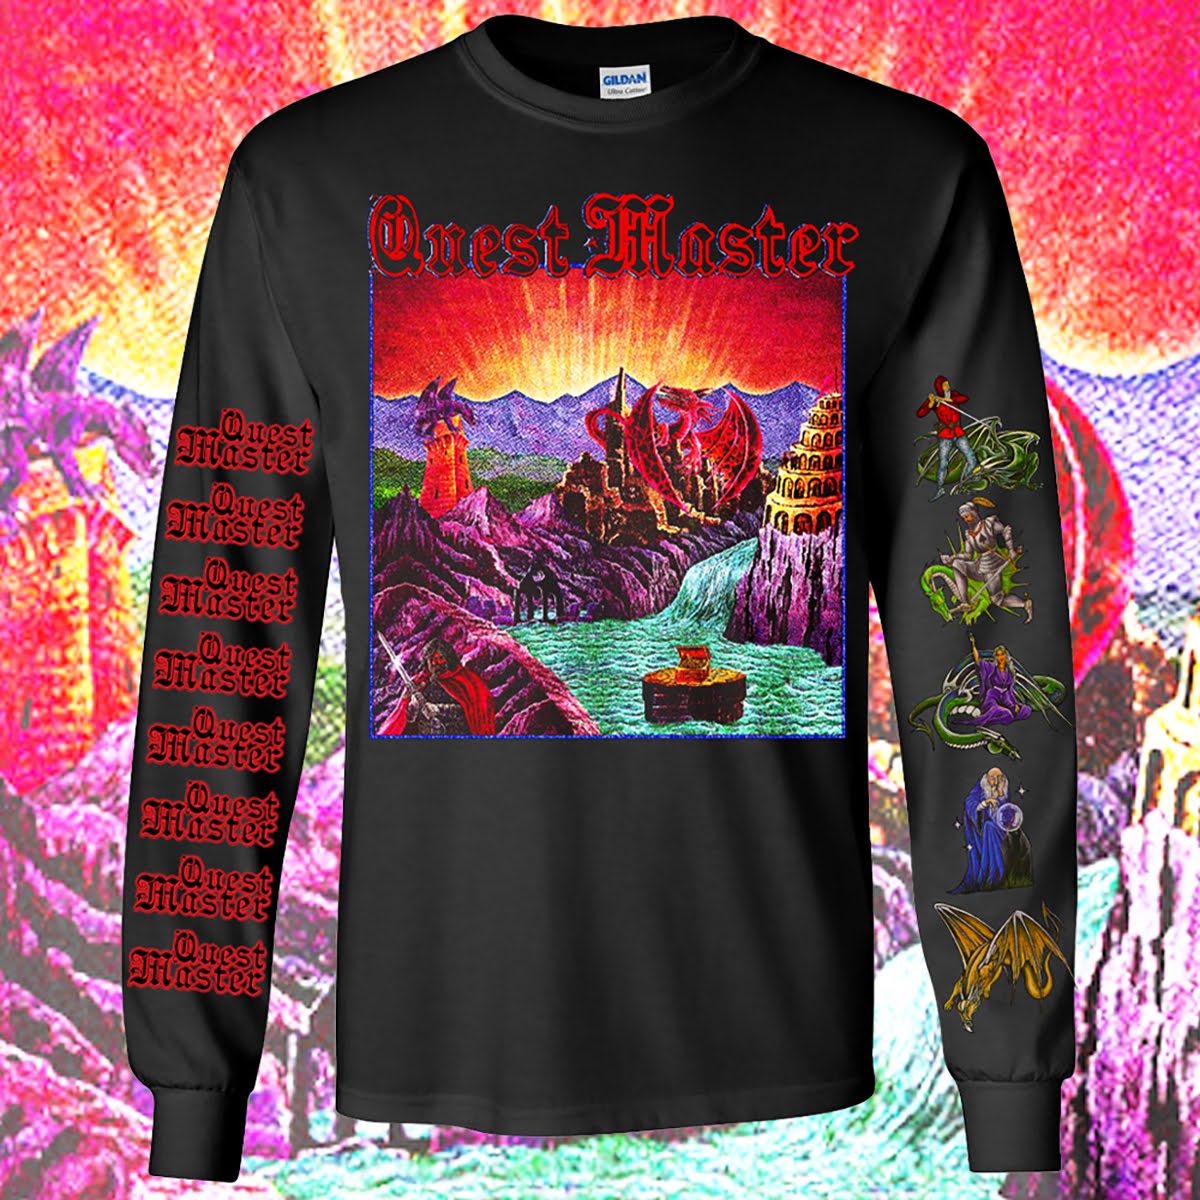 [SOLD OUT] QUEST MASTER "Twelve Collection" Long Sleeve Shirt [BLACK]